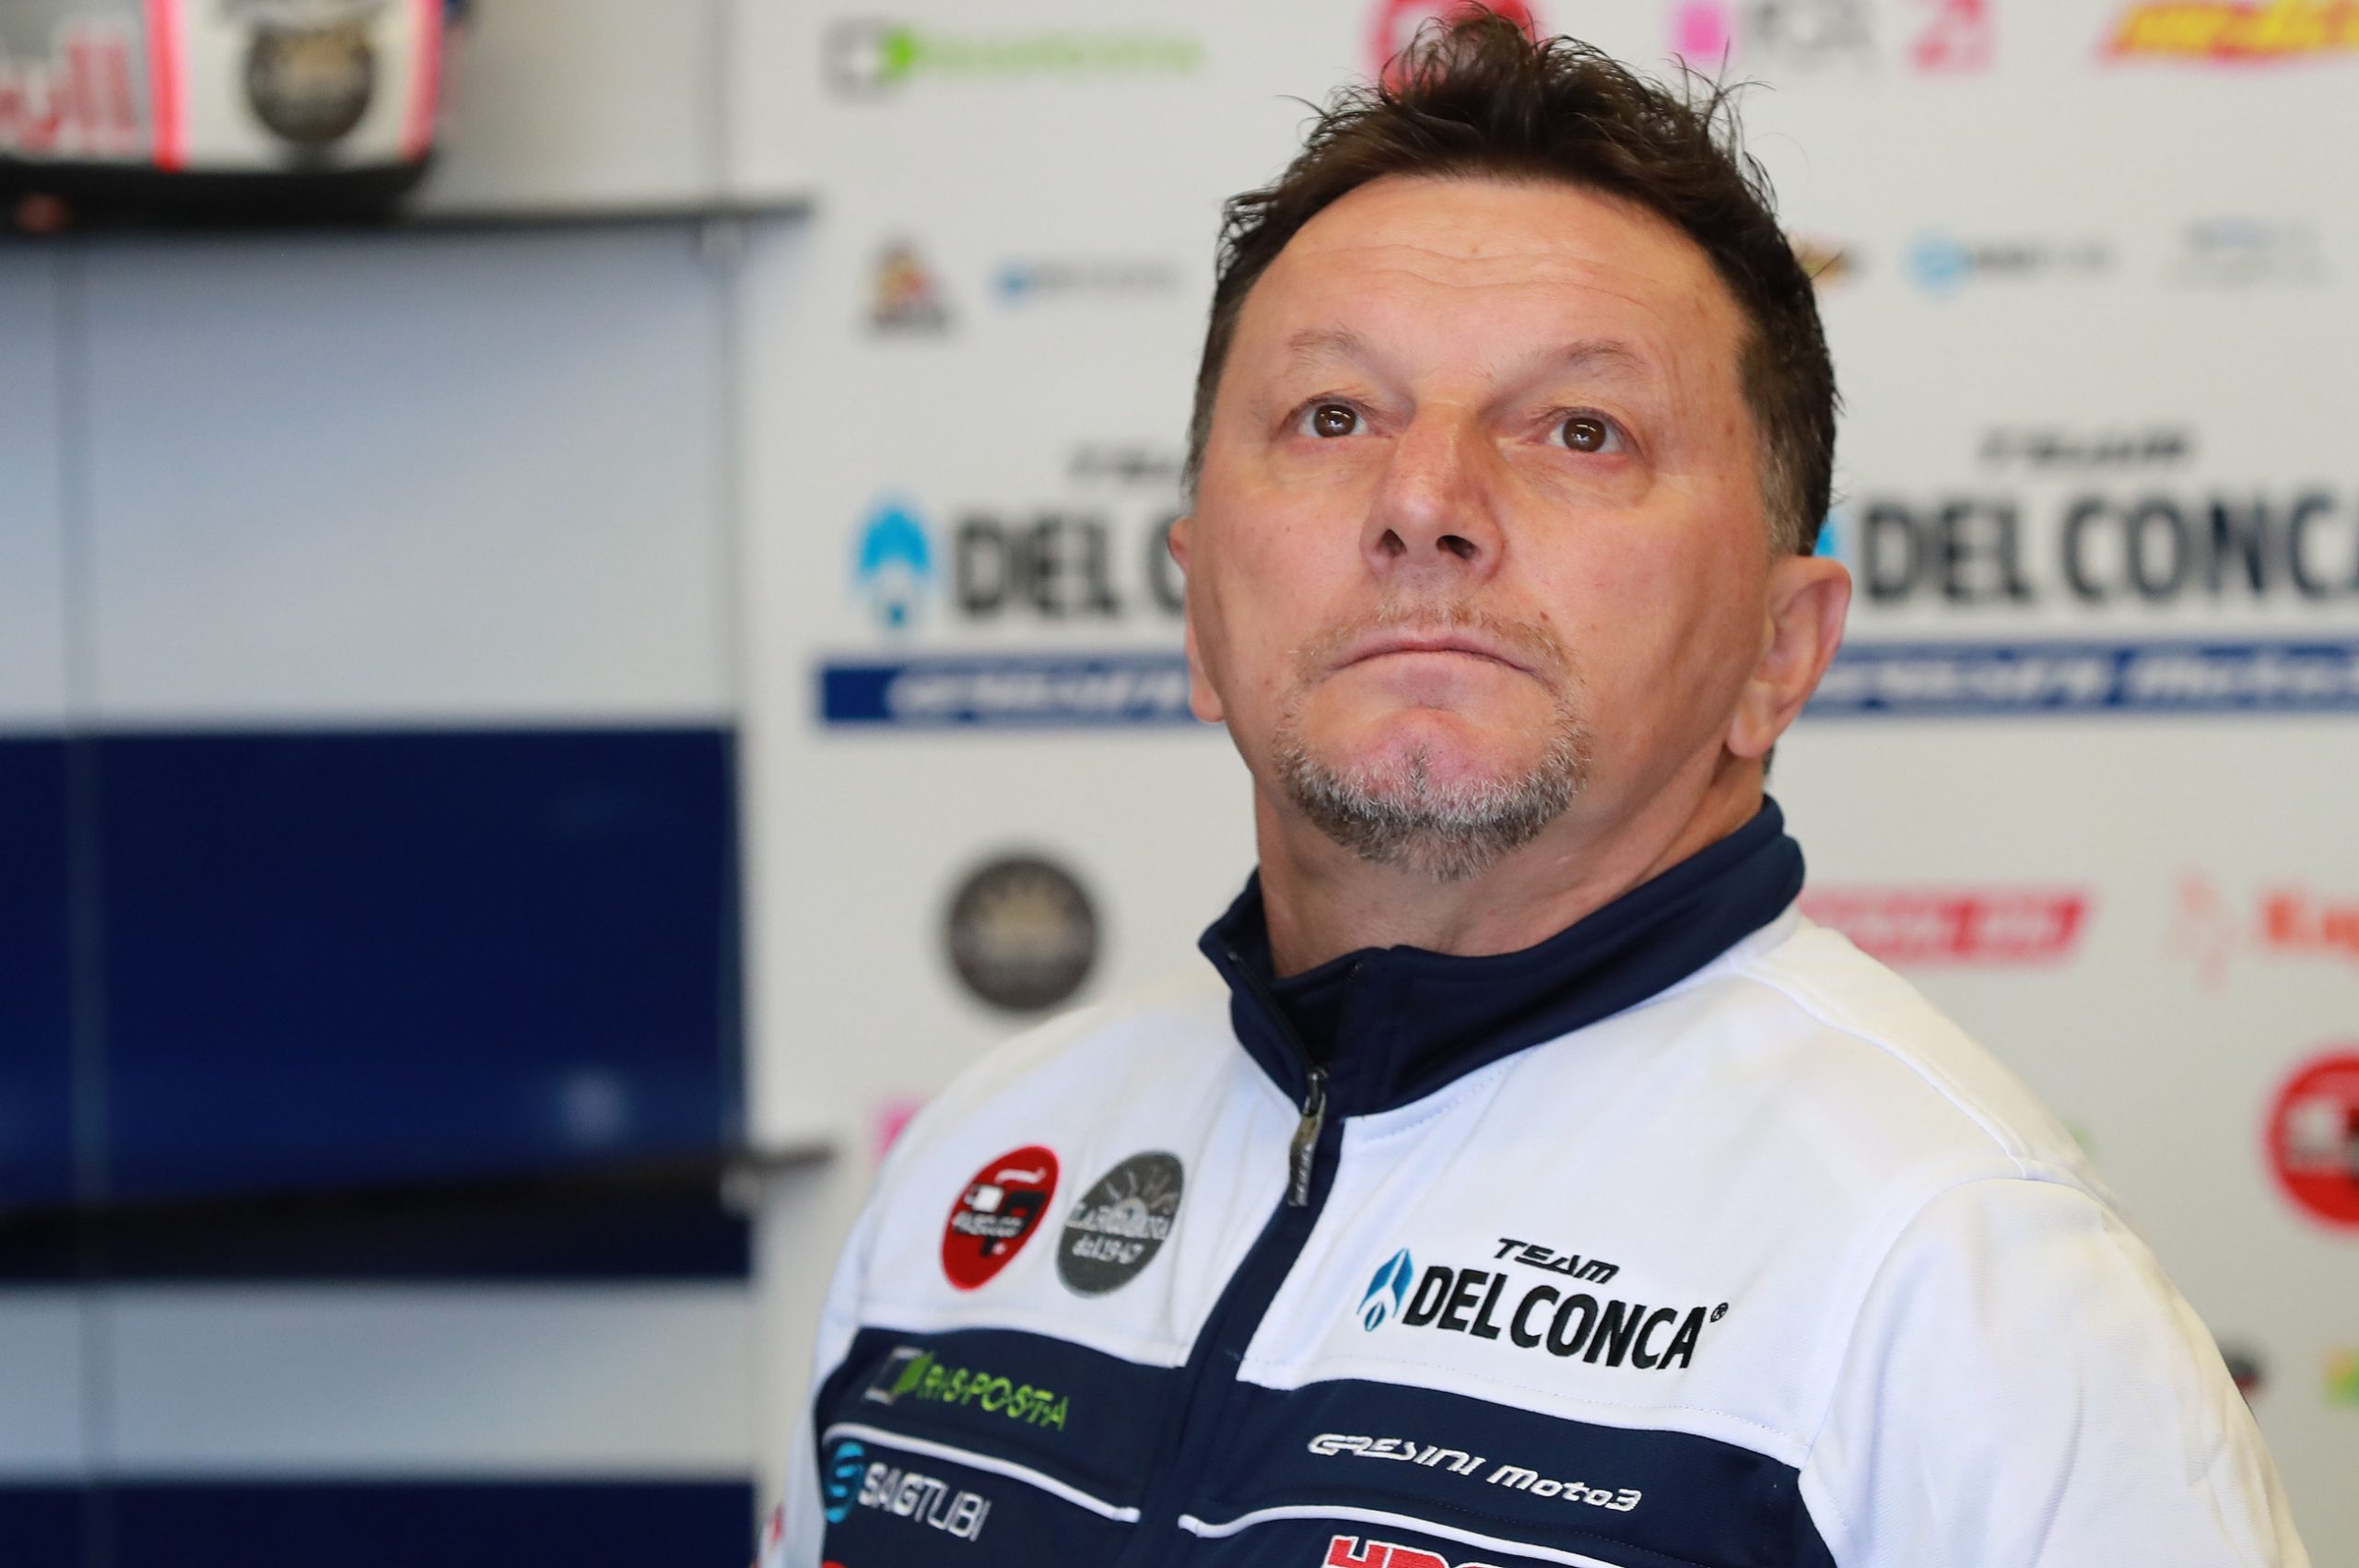 Gresini boss condition improving after being placed in a medically induced coma